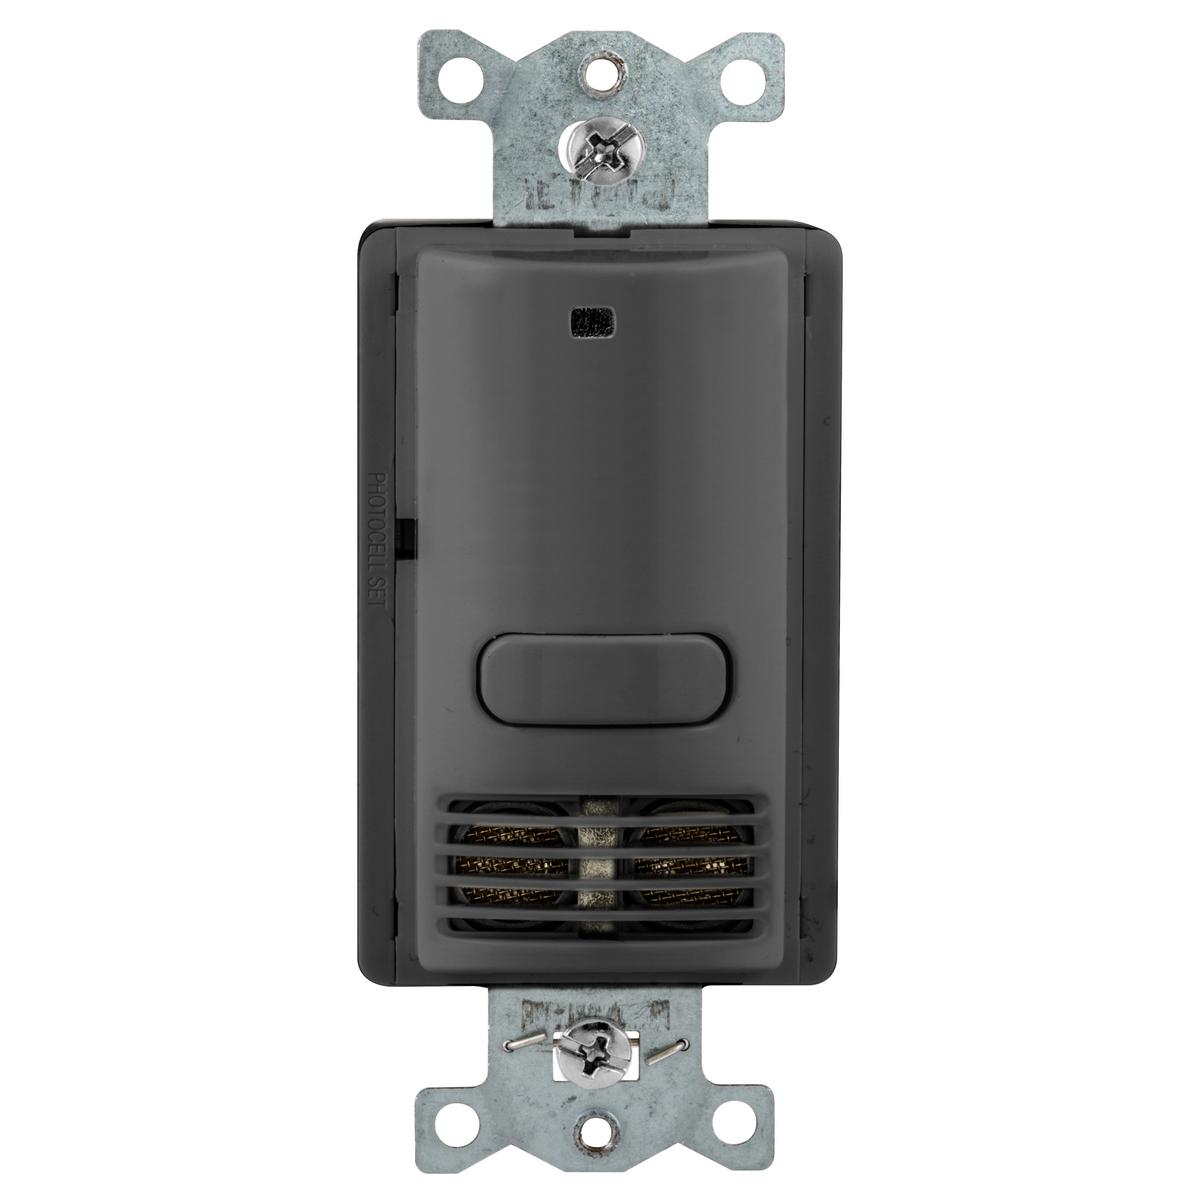 Hubbell AU2000BK1 Occupancy Sensing Products, Wall Switch,Occupancy or Vacancy, Ultrasonic, 1 Relay, 1000 Square Feet,800WIncandescent, 1000W Fluorescent @ 120V AC, 1800W Fluorescent @ 277VAC, 120/277V AC, With Photocell, Black 